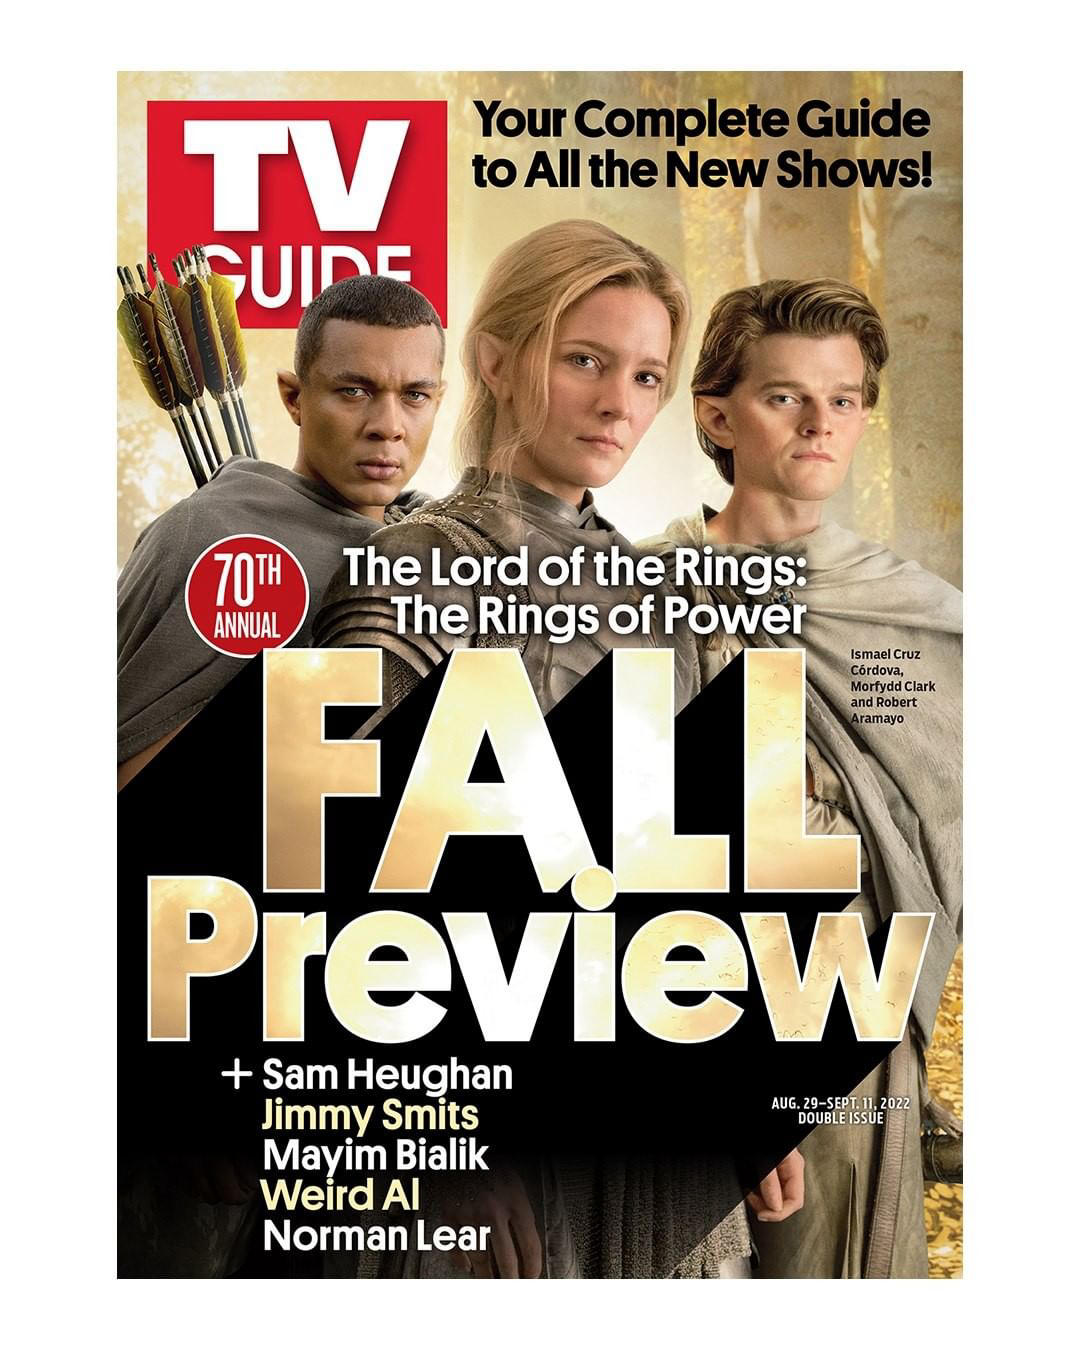 The Lord of the Rings on Prime - #TheRingsOfPower has taken over #tvguidemagazine